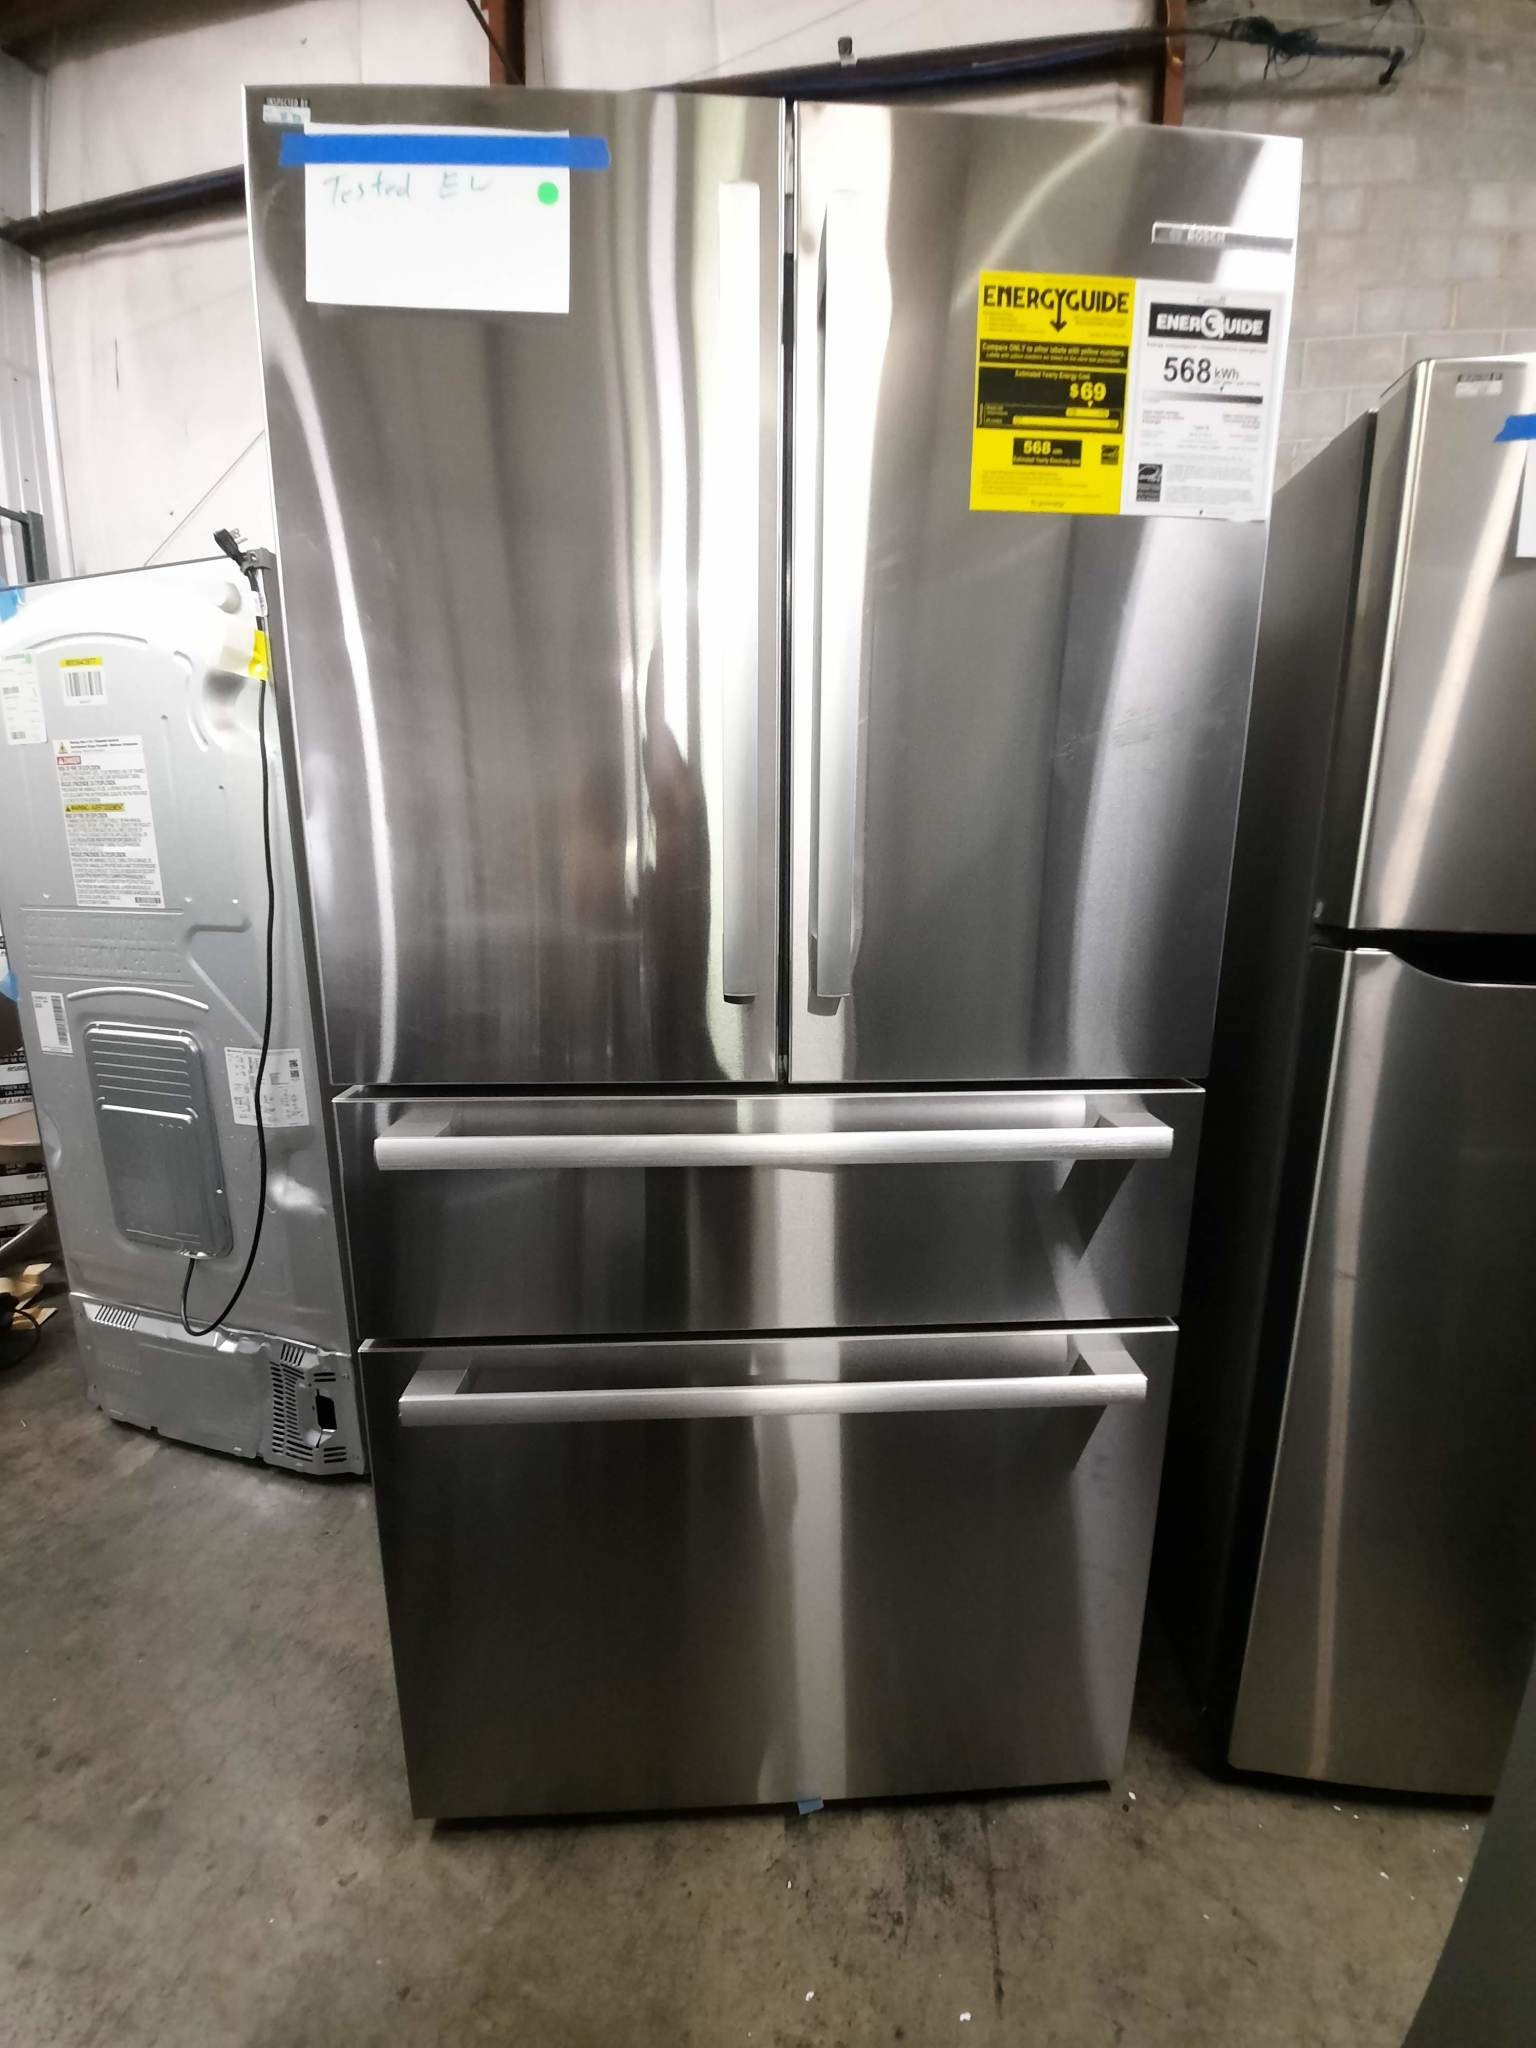 B36CL80SNS by Bosch - 800 Series French Door Bottom Mount Refrigerator 36  Easy clean stainless steel B36CL80SNS